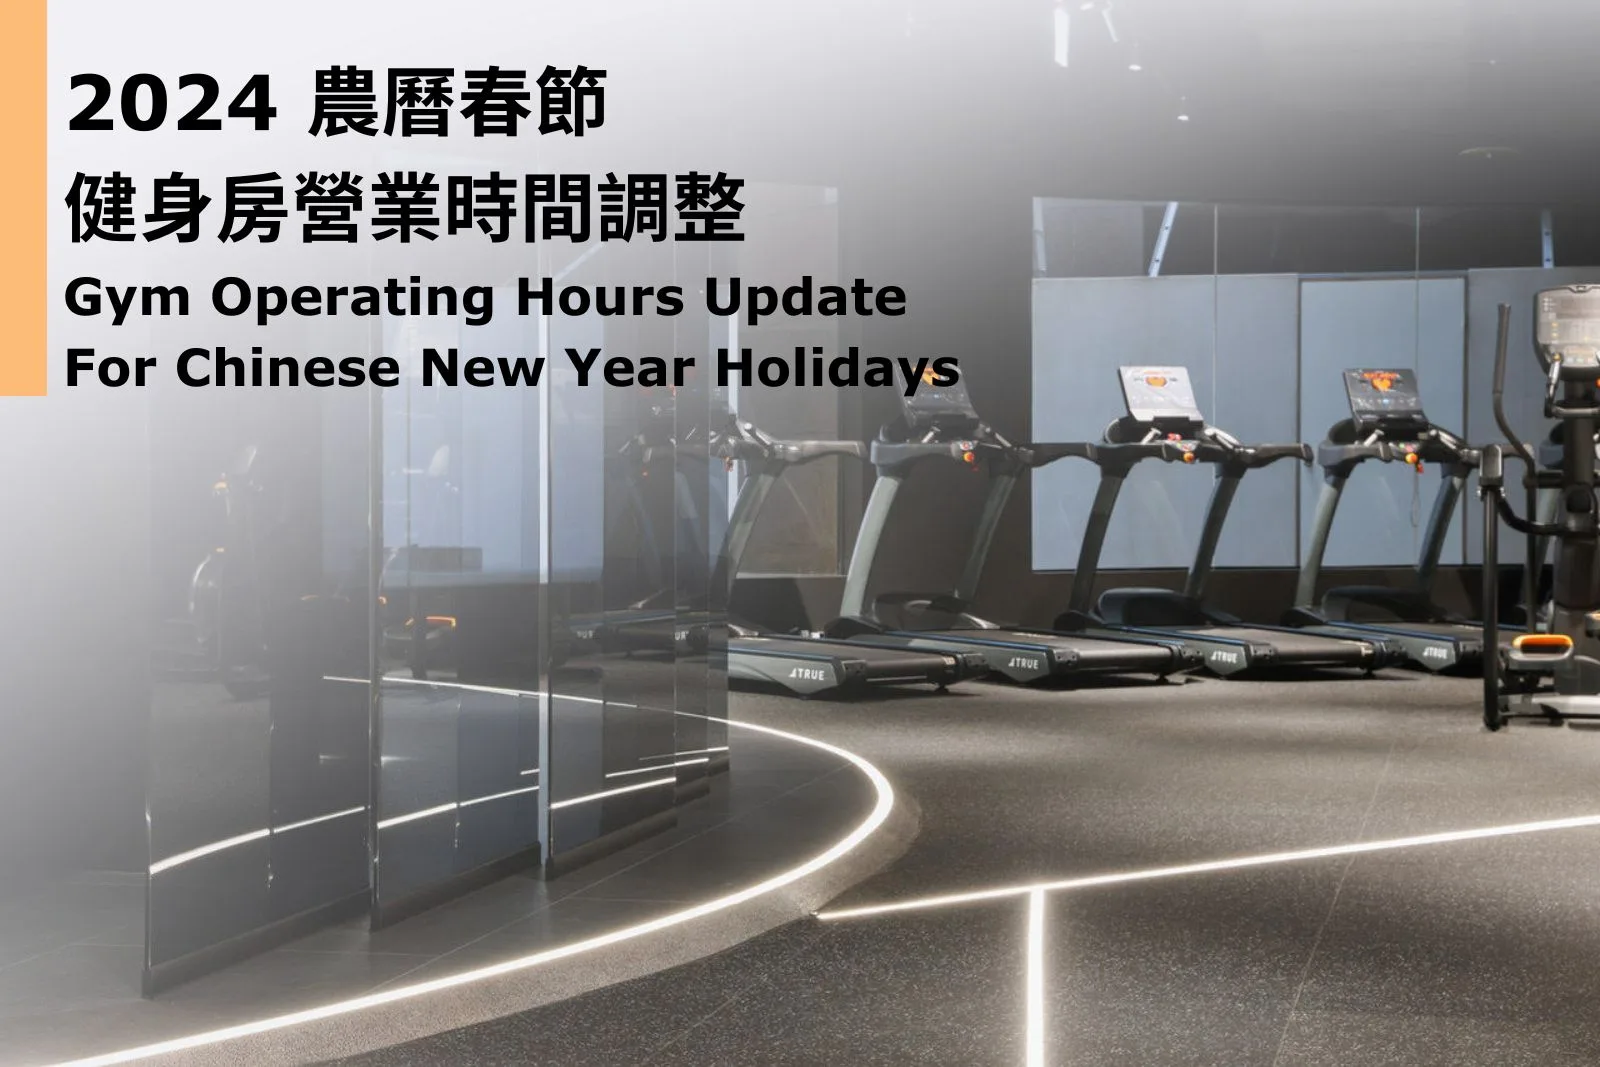 Gym Operating Hours Update for Chinese New Year